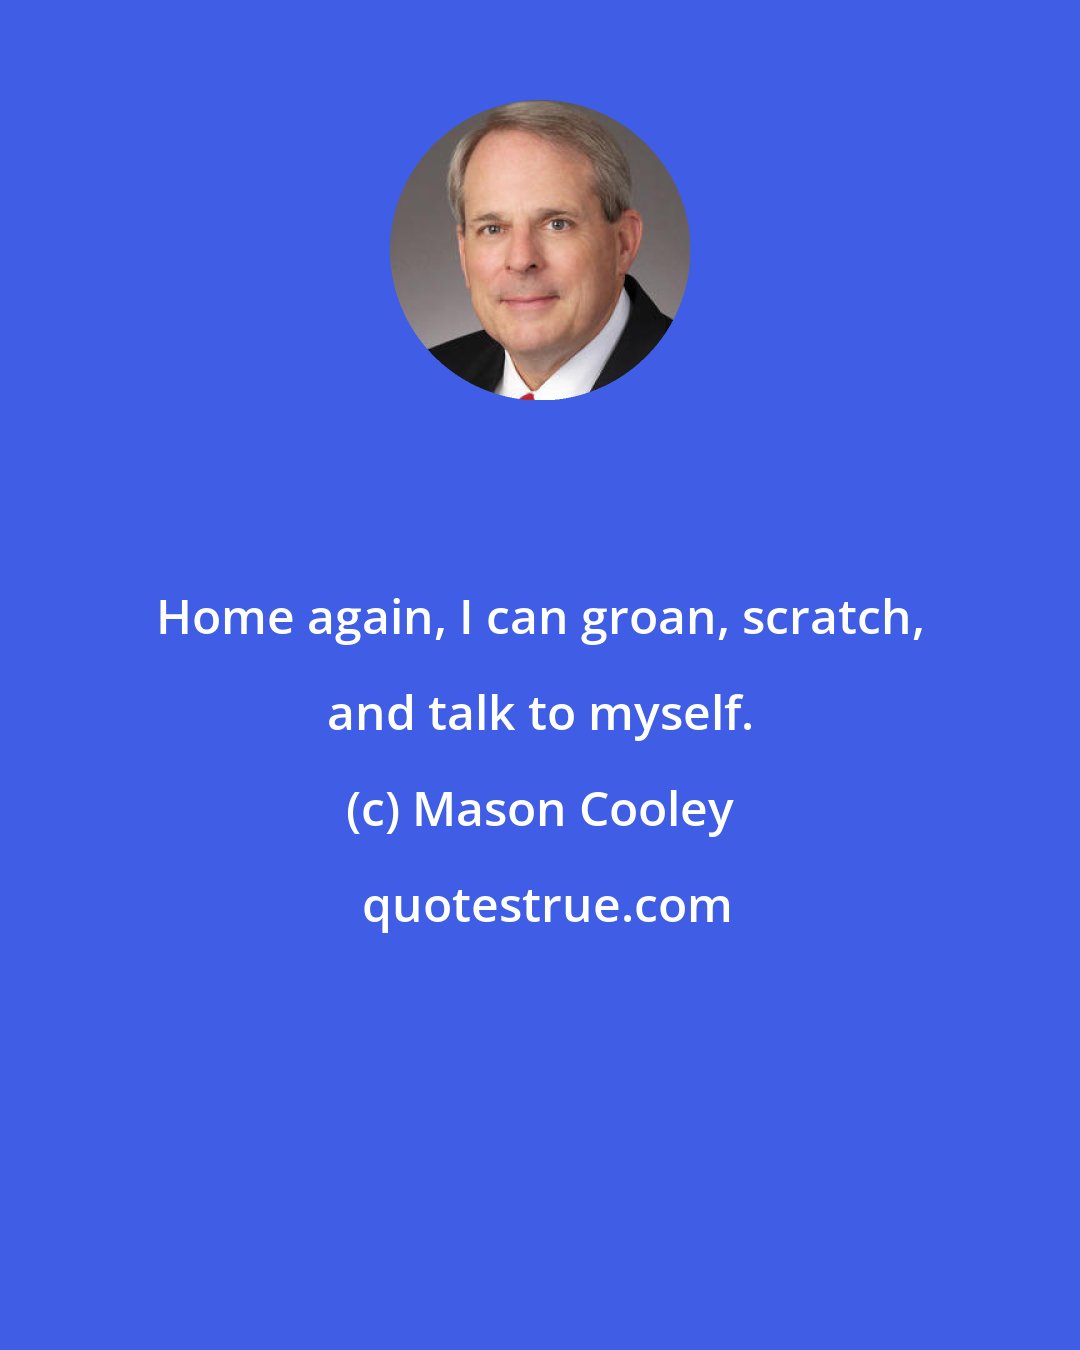 Mason Cooley: Home again, I can groan, scratch, and talk to myself.